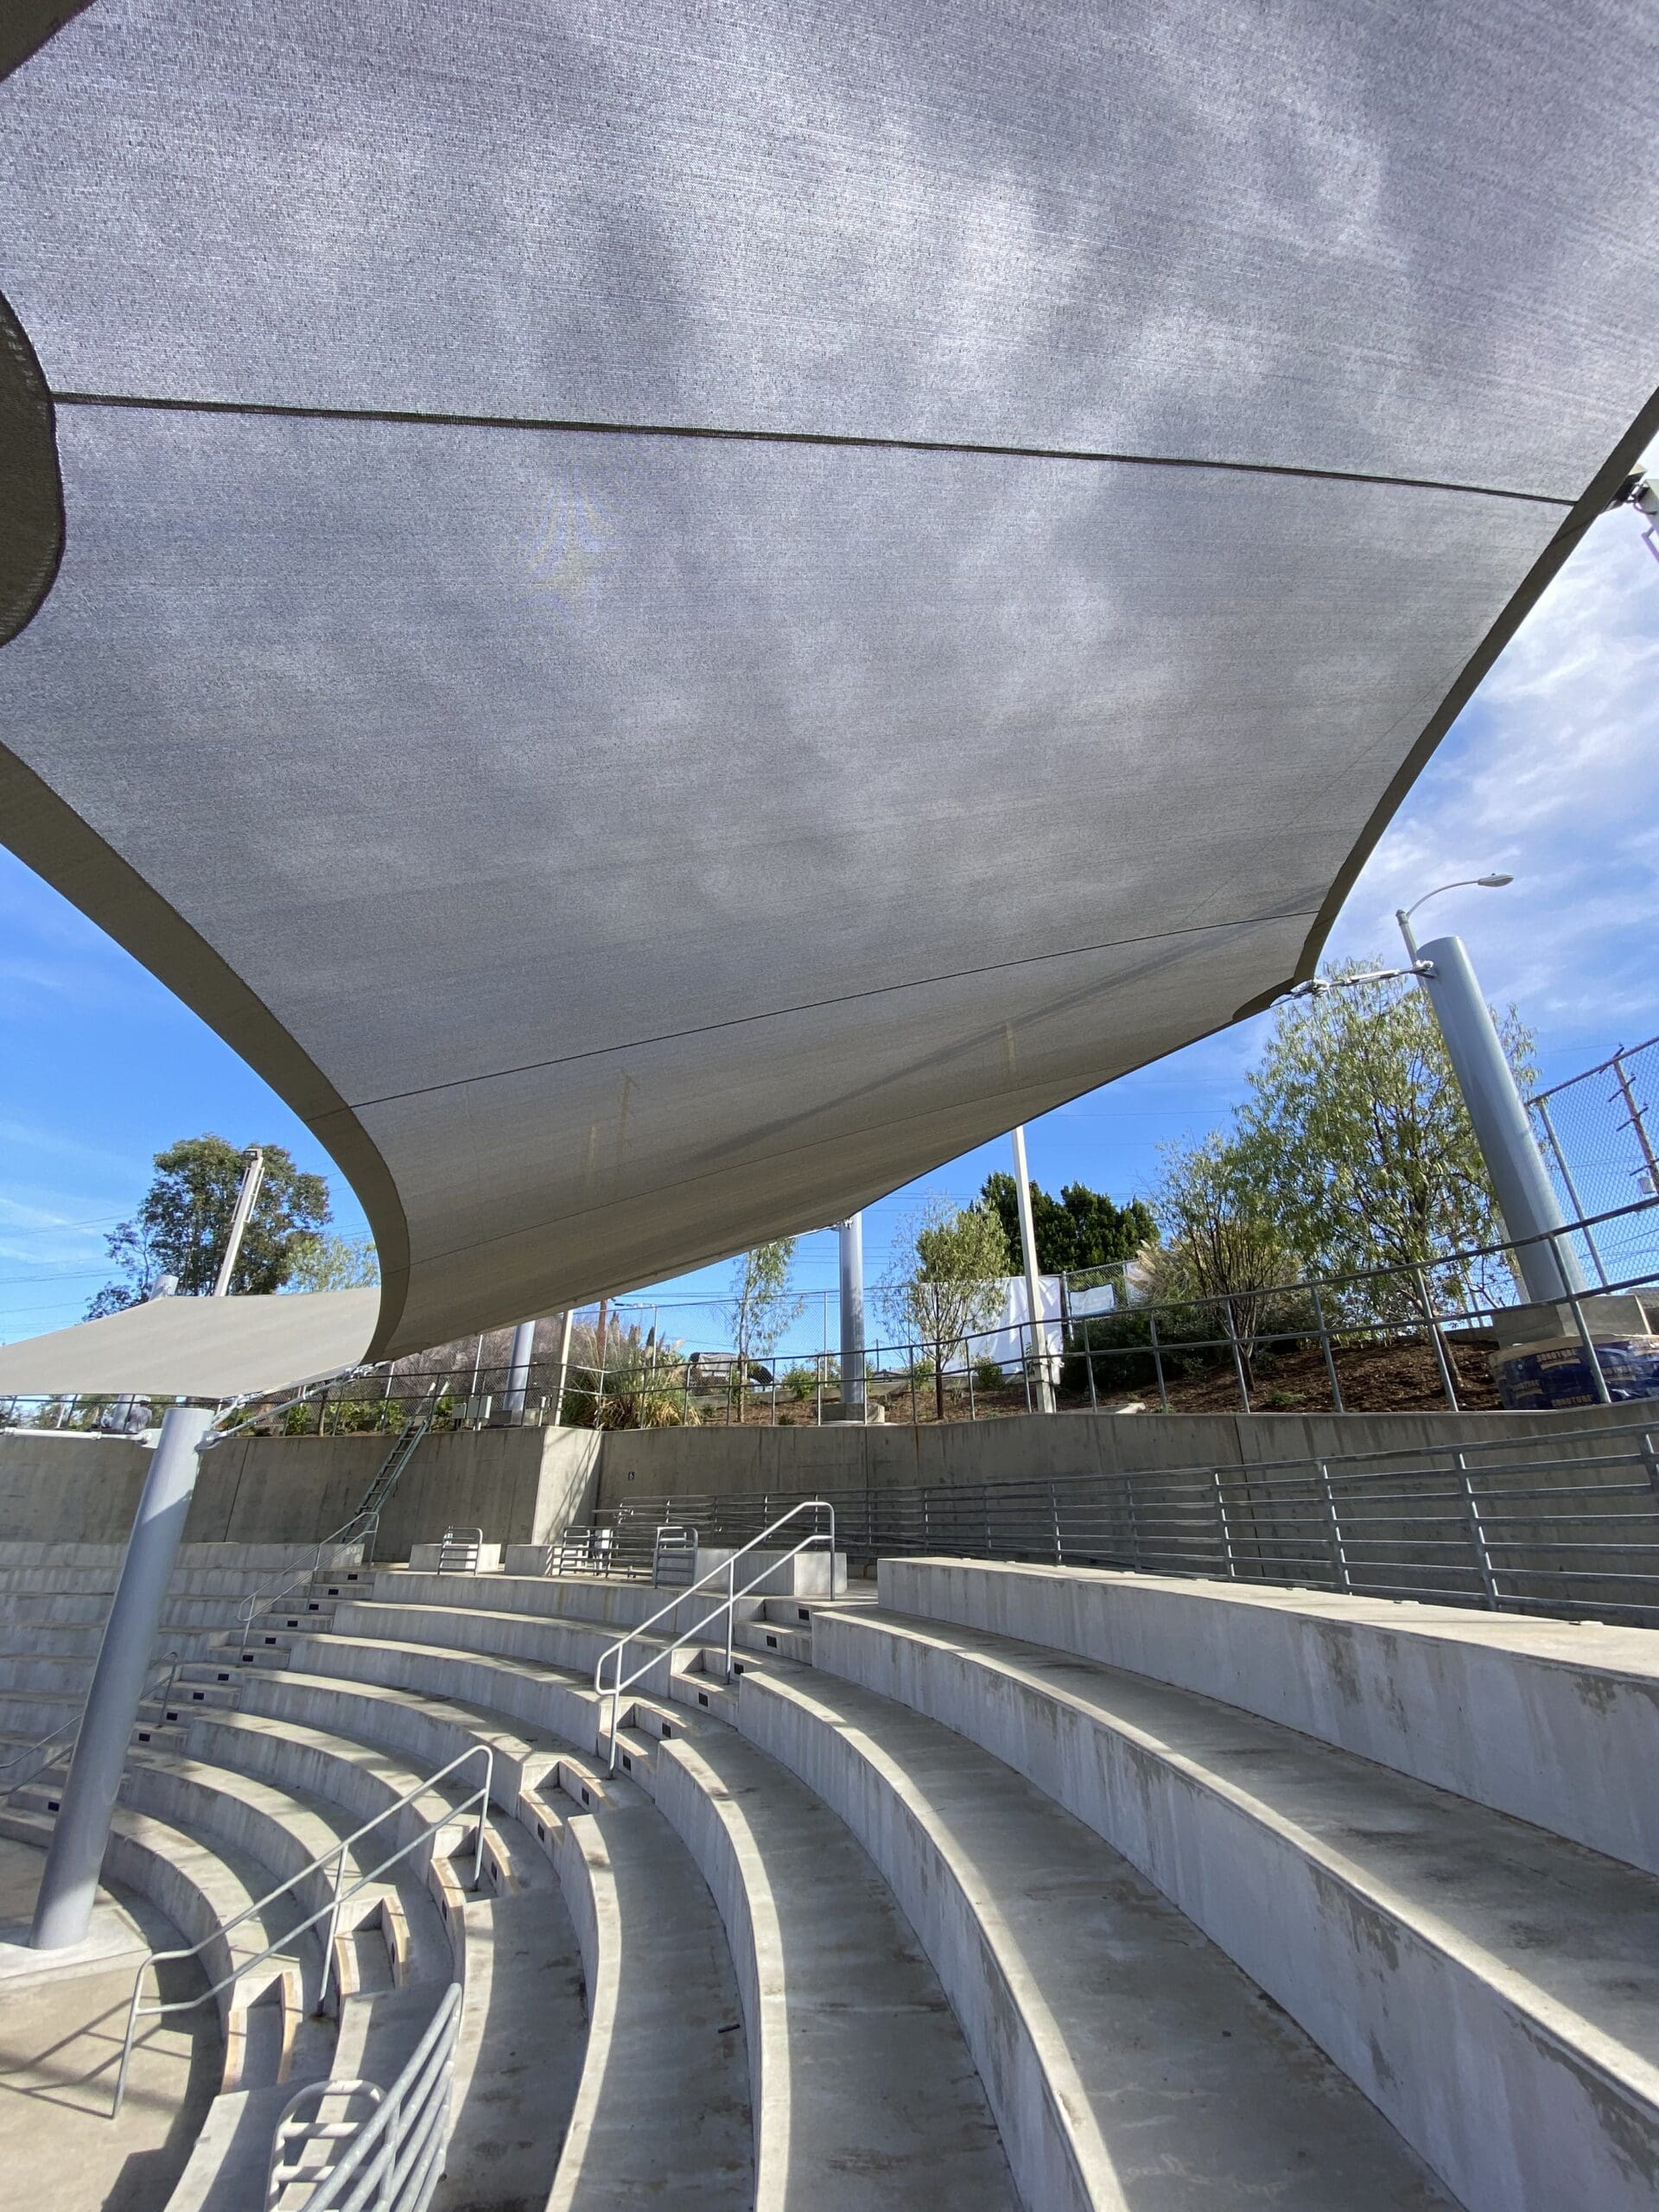 concrete amphitheater seating under shade